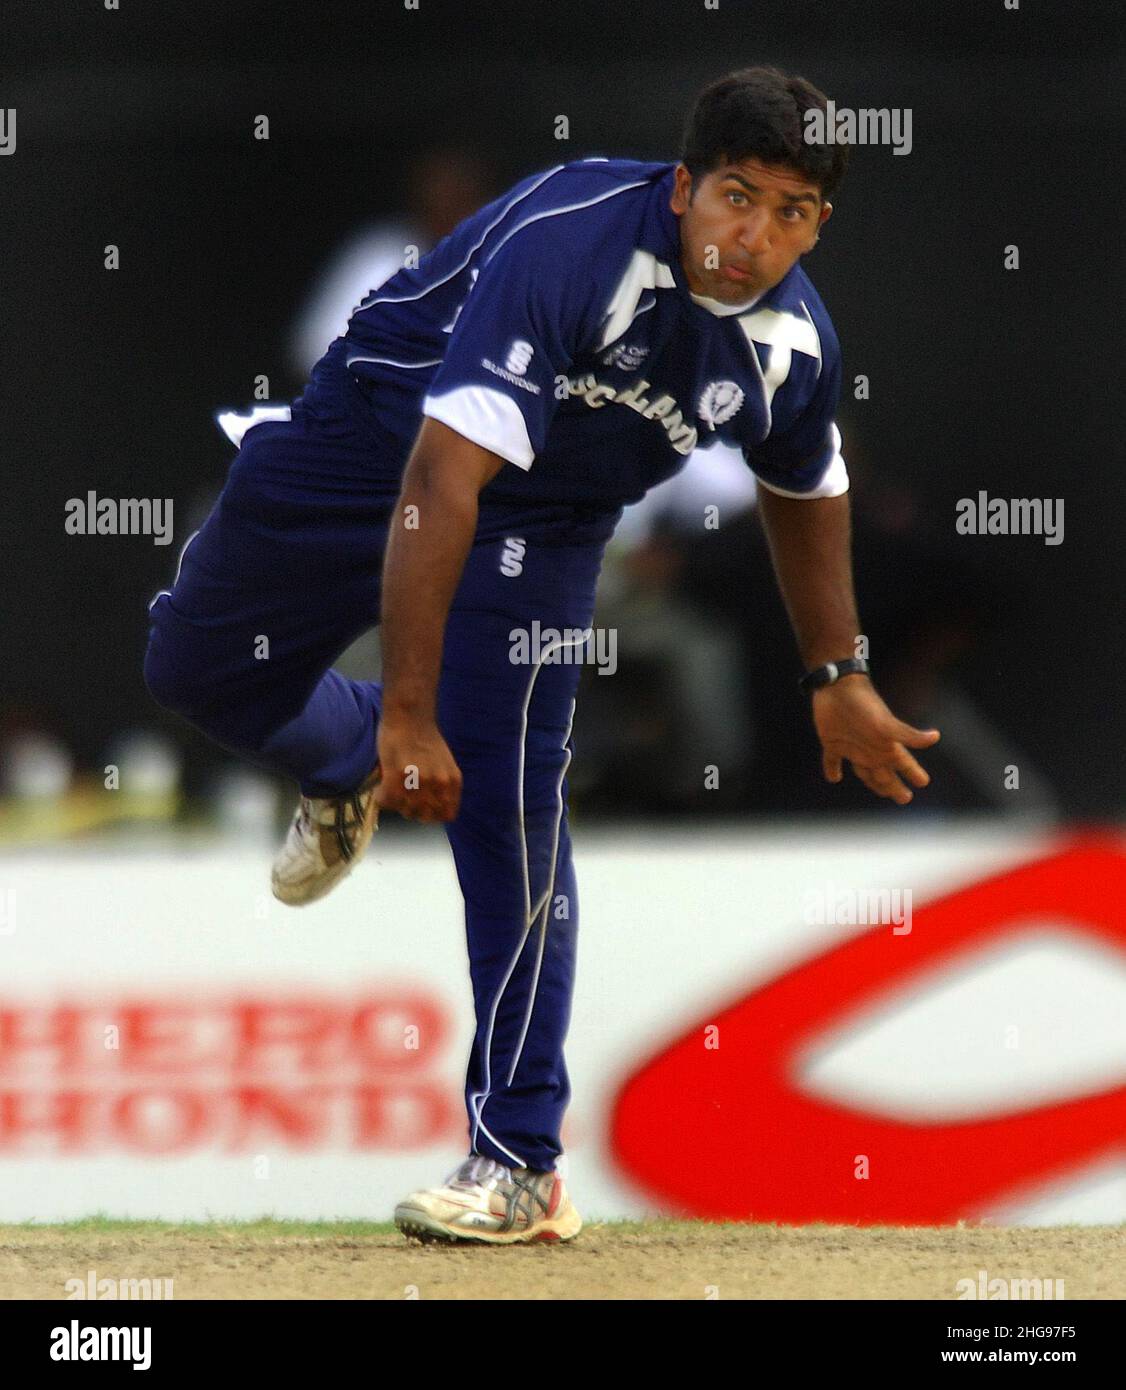 File photo dated 20-03-2007 of Scotland's Majid Haq. The team leading an independent review into racism within Scottish cricket are appealing for those affected to come forward and share their experiences to help improve the sport. Issue date: Wednesday January 19, 2022. Stock Photo